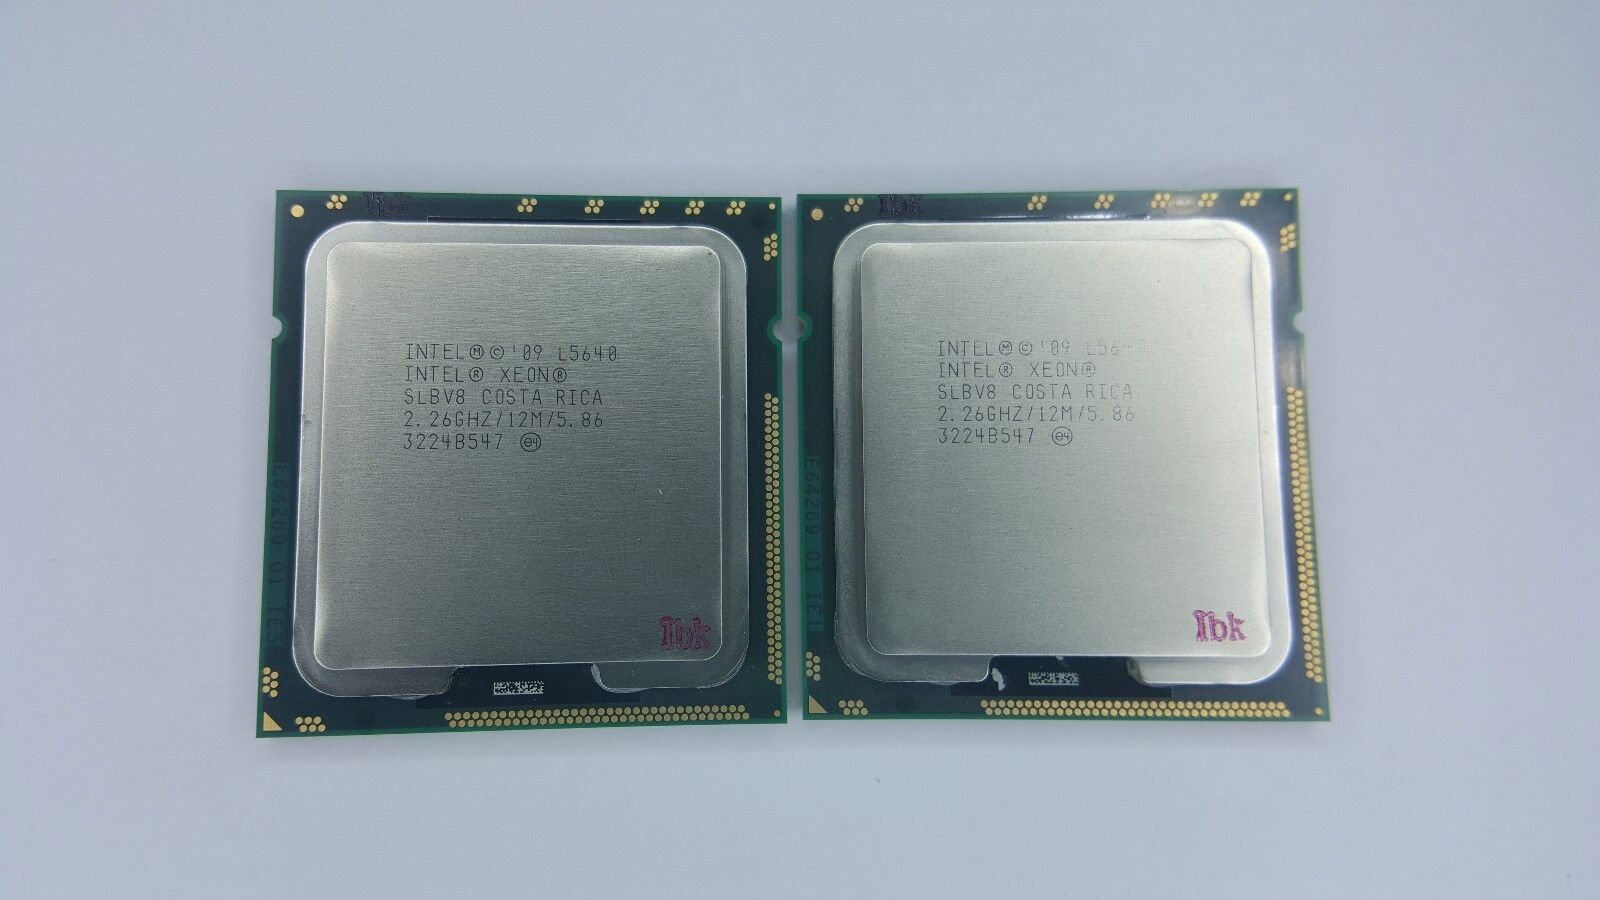 Matched pair of Intel Xeon L5640 2.26GHz Six Core SLBV8 Processor w/Grease